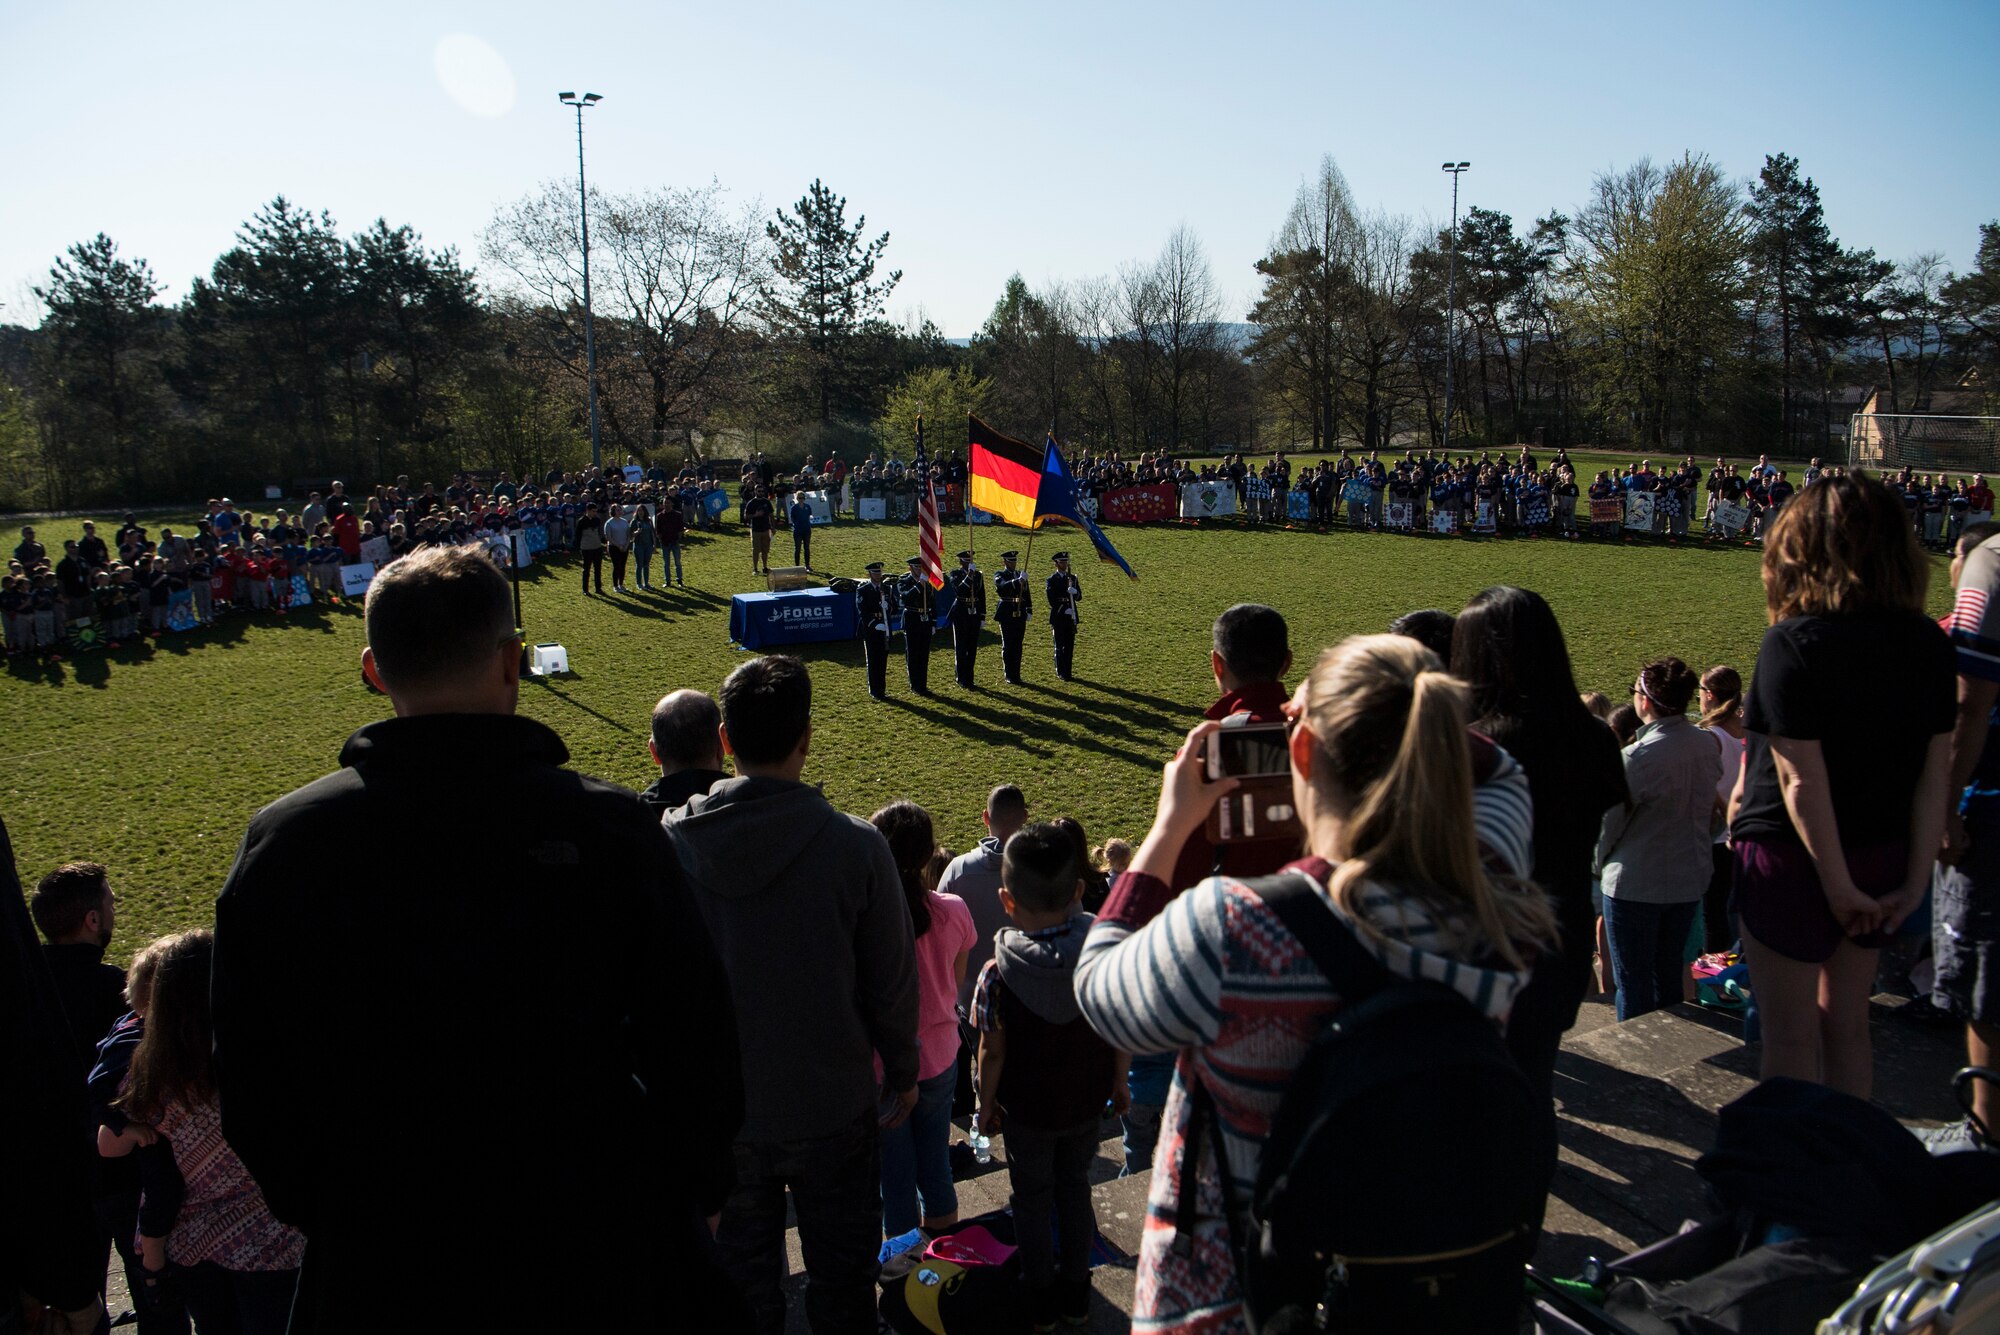 Brig. Gen. Mark R. August, 86th Airlift Wing commander gave opening remarks during the 2019 Spring Youth Sports kickoff opening day event on Ramstein Air Base, Germany, April 20, 2019.